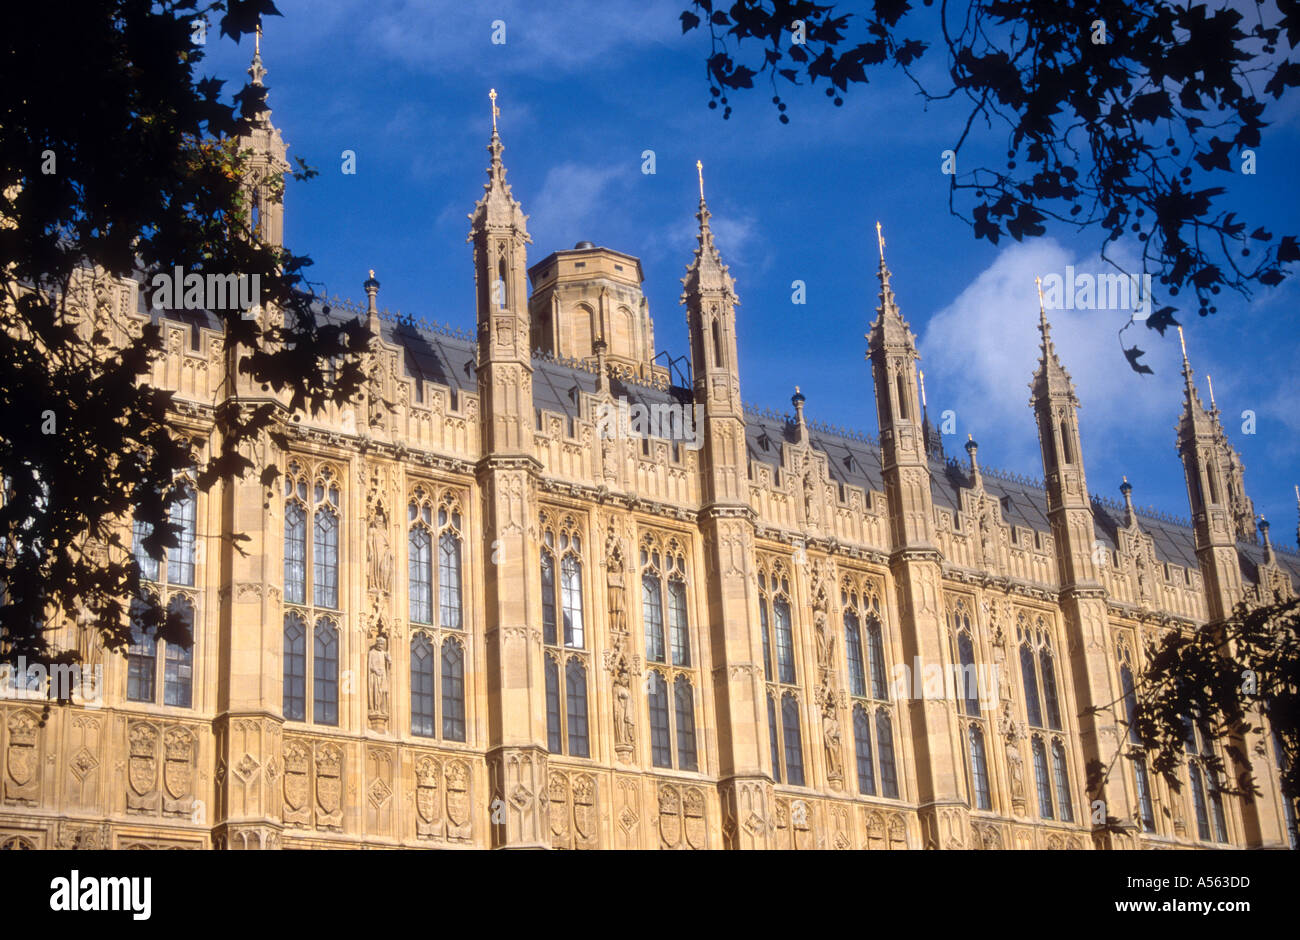 The Houses of Parliament seen from Victoria Gardens London SW1 England UK Europe Stock Photo